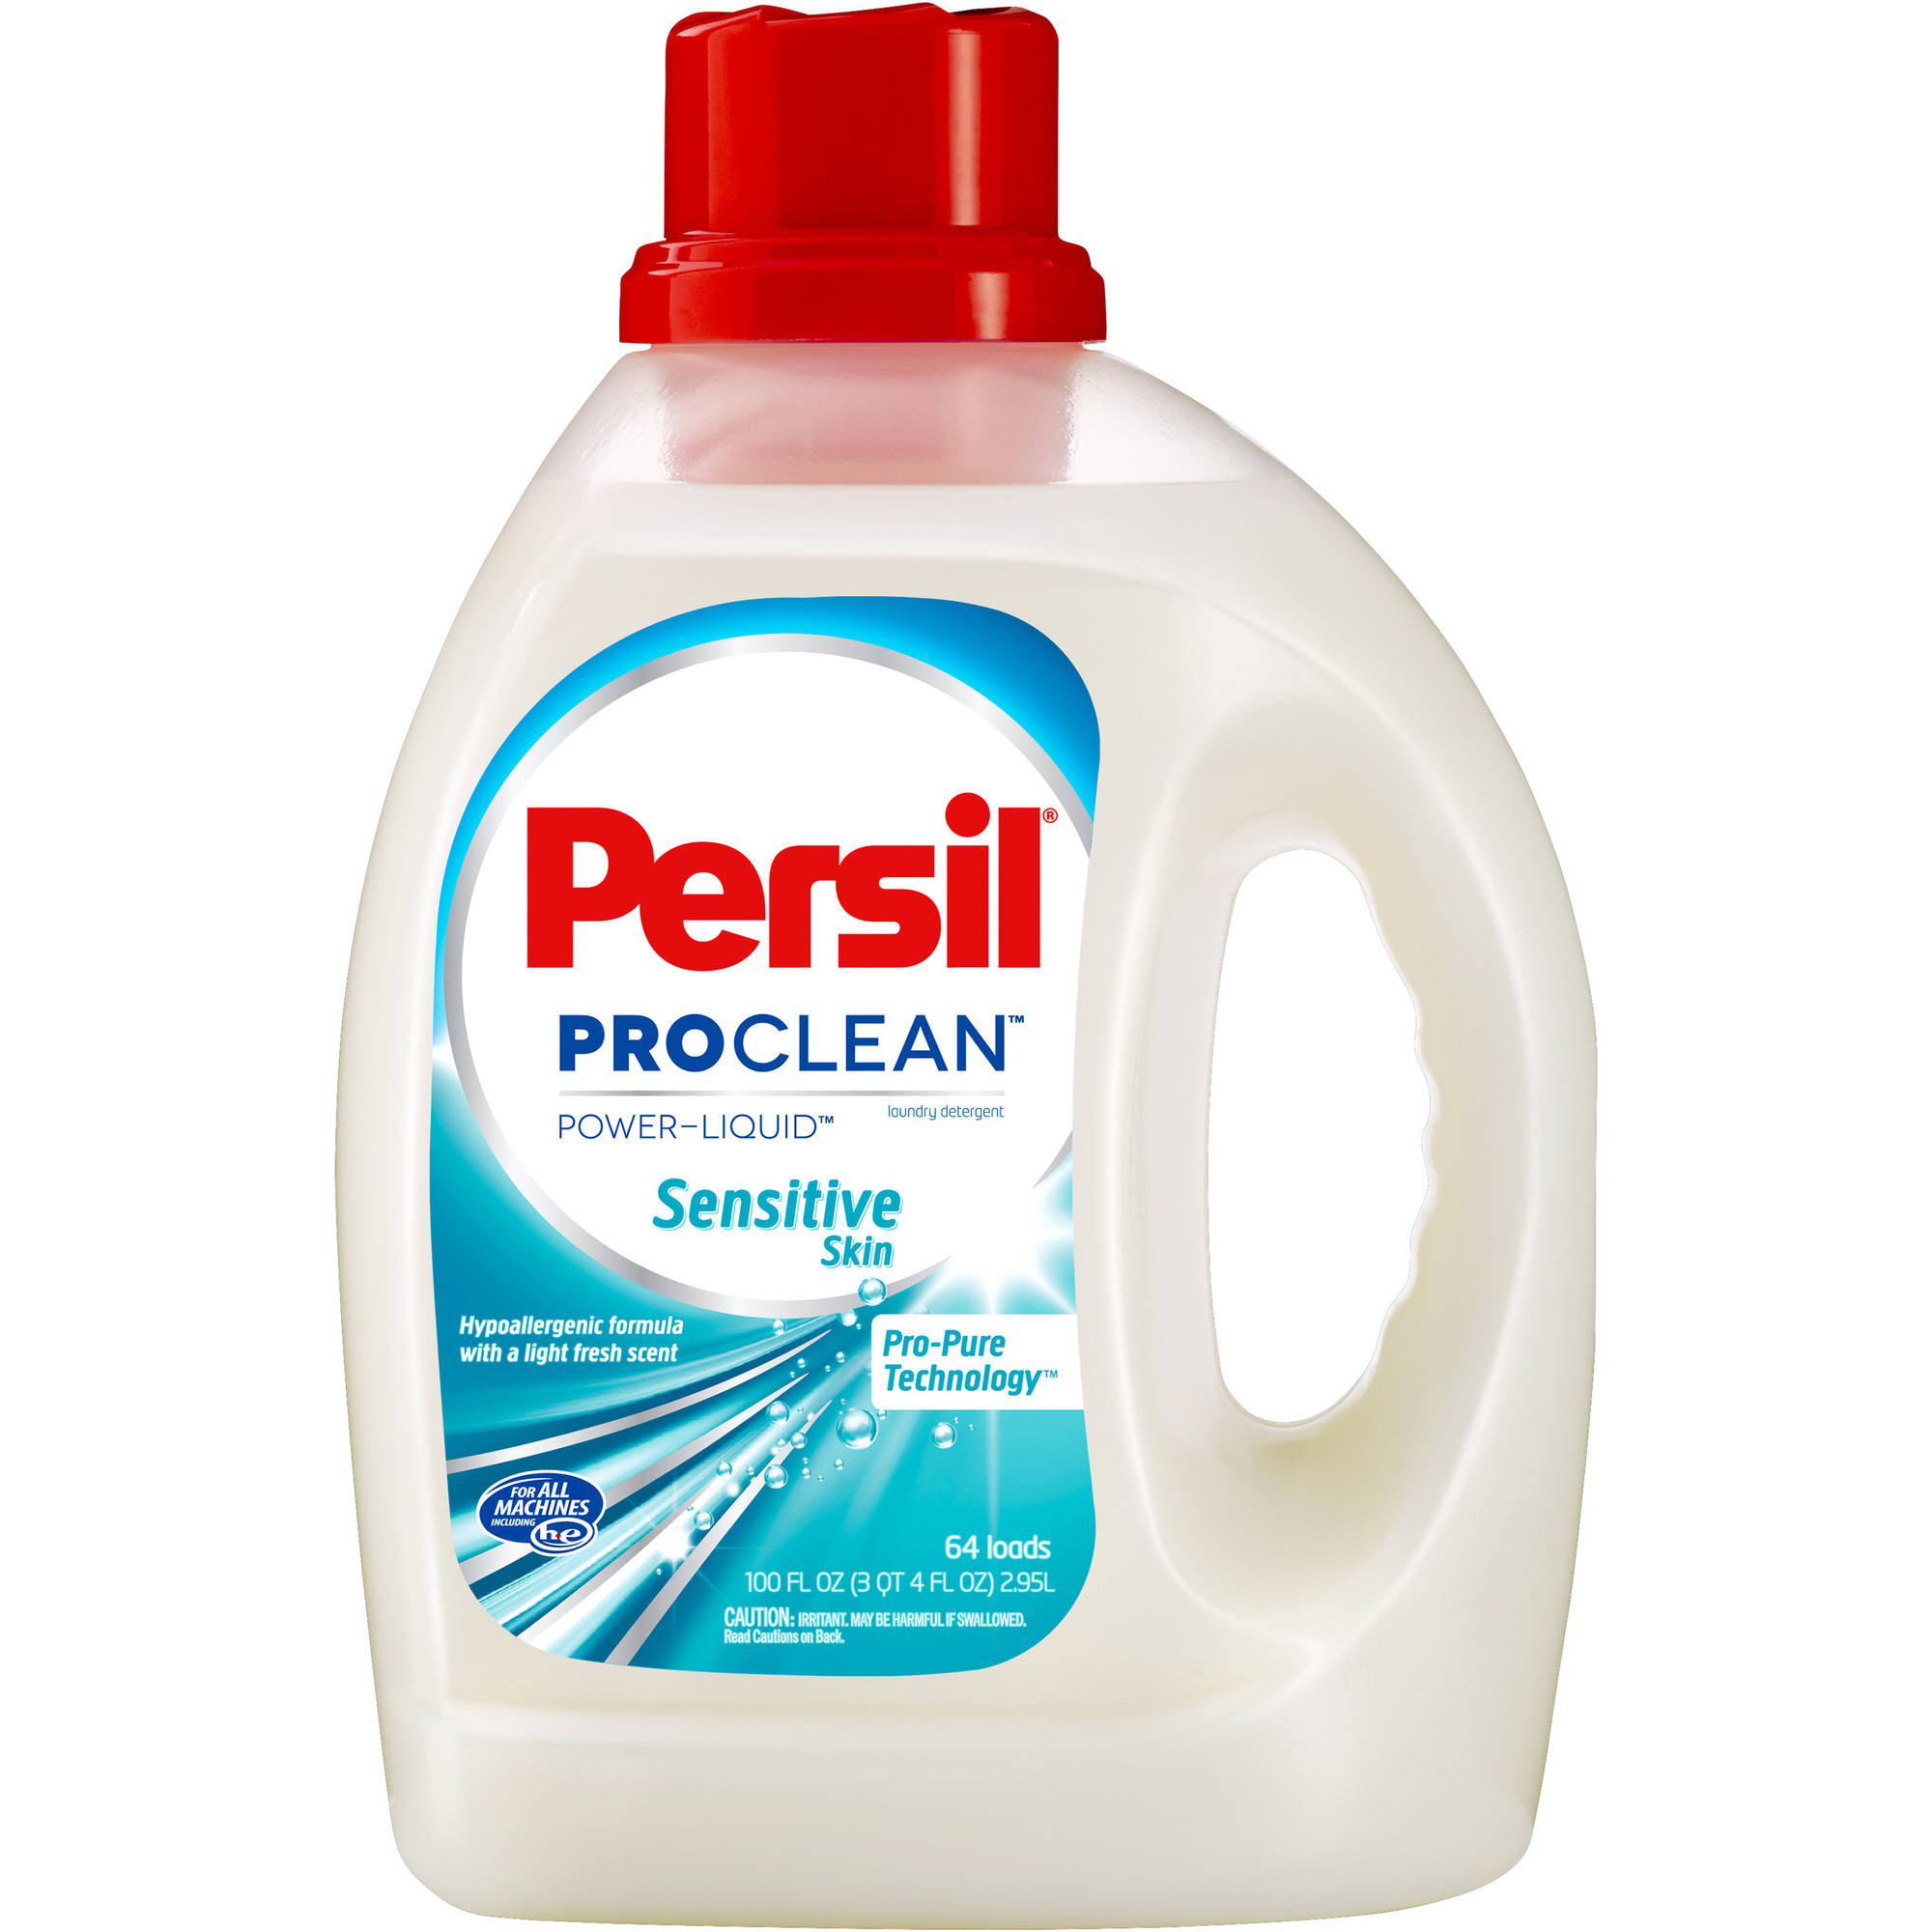 free-5-rebate-check-wyb-20-in-persil-laundry-detergent